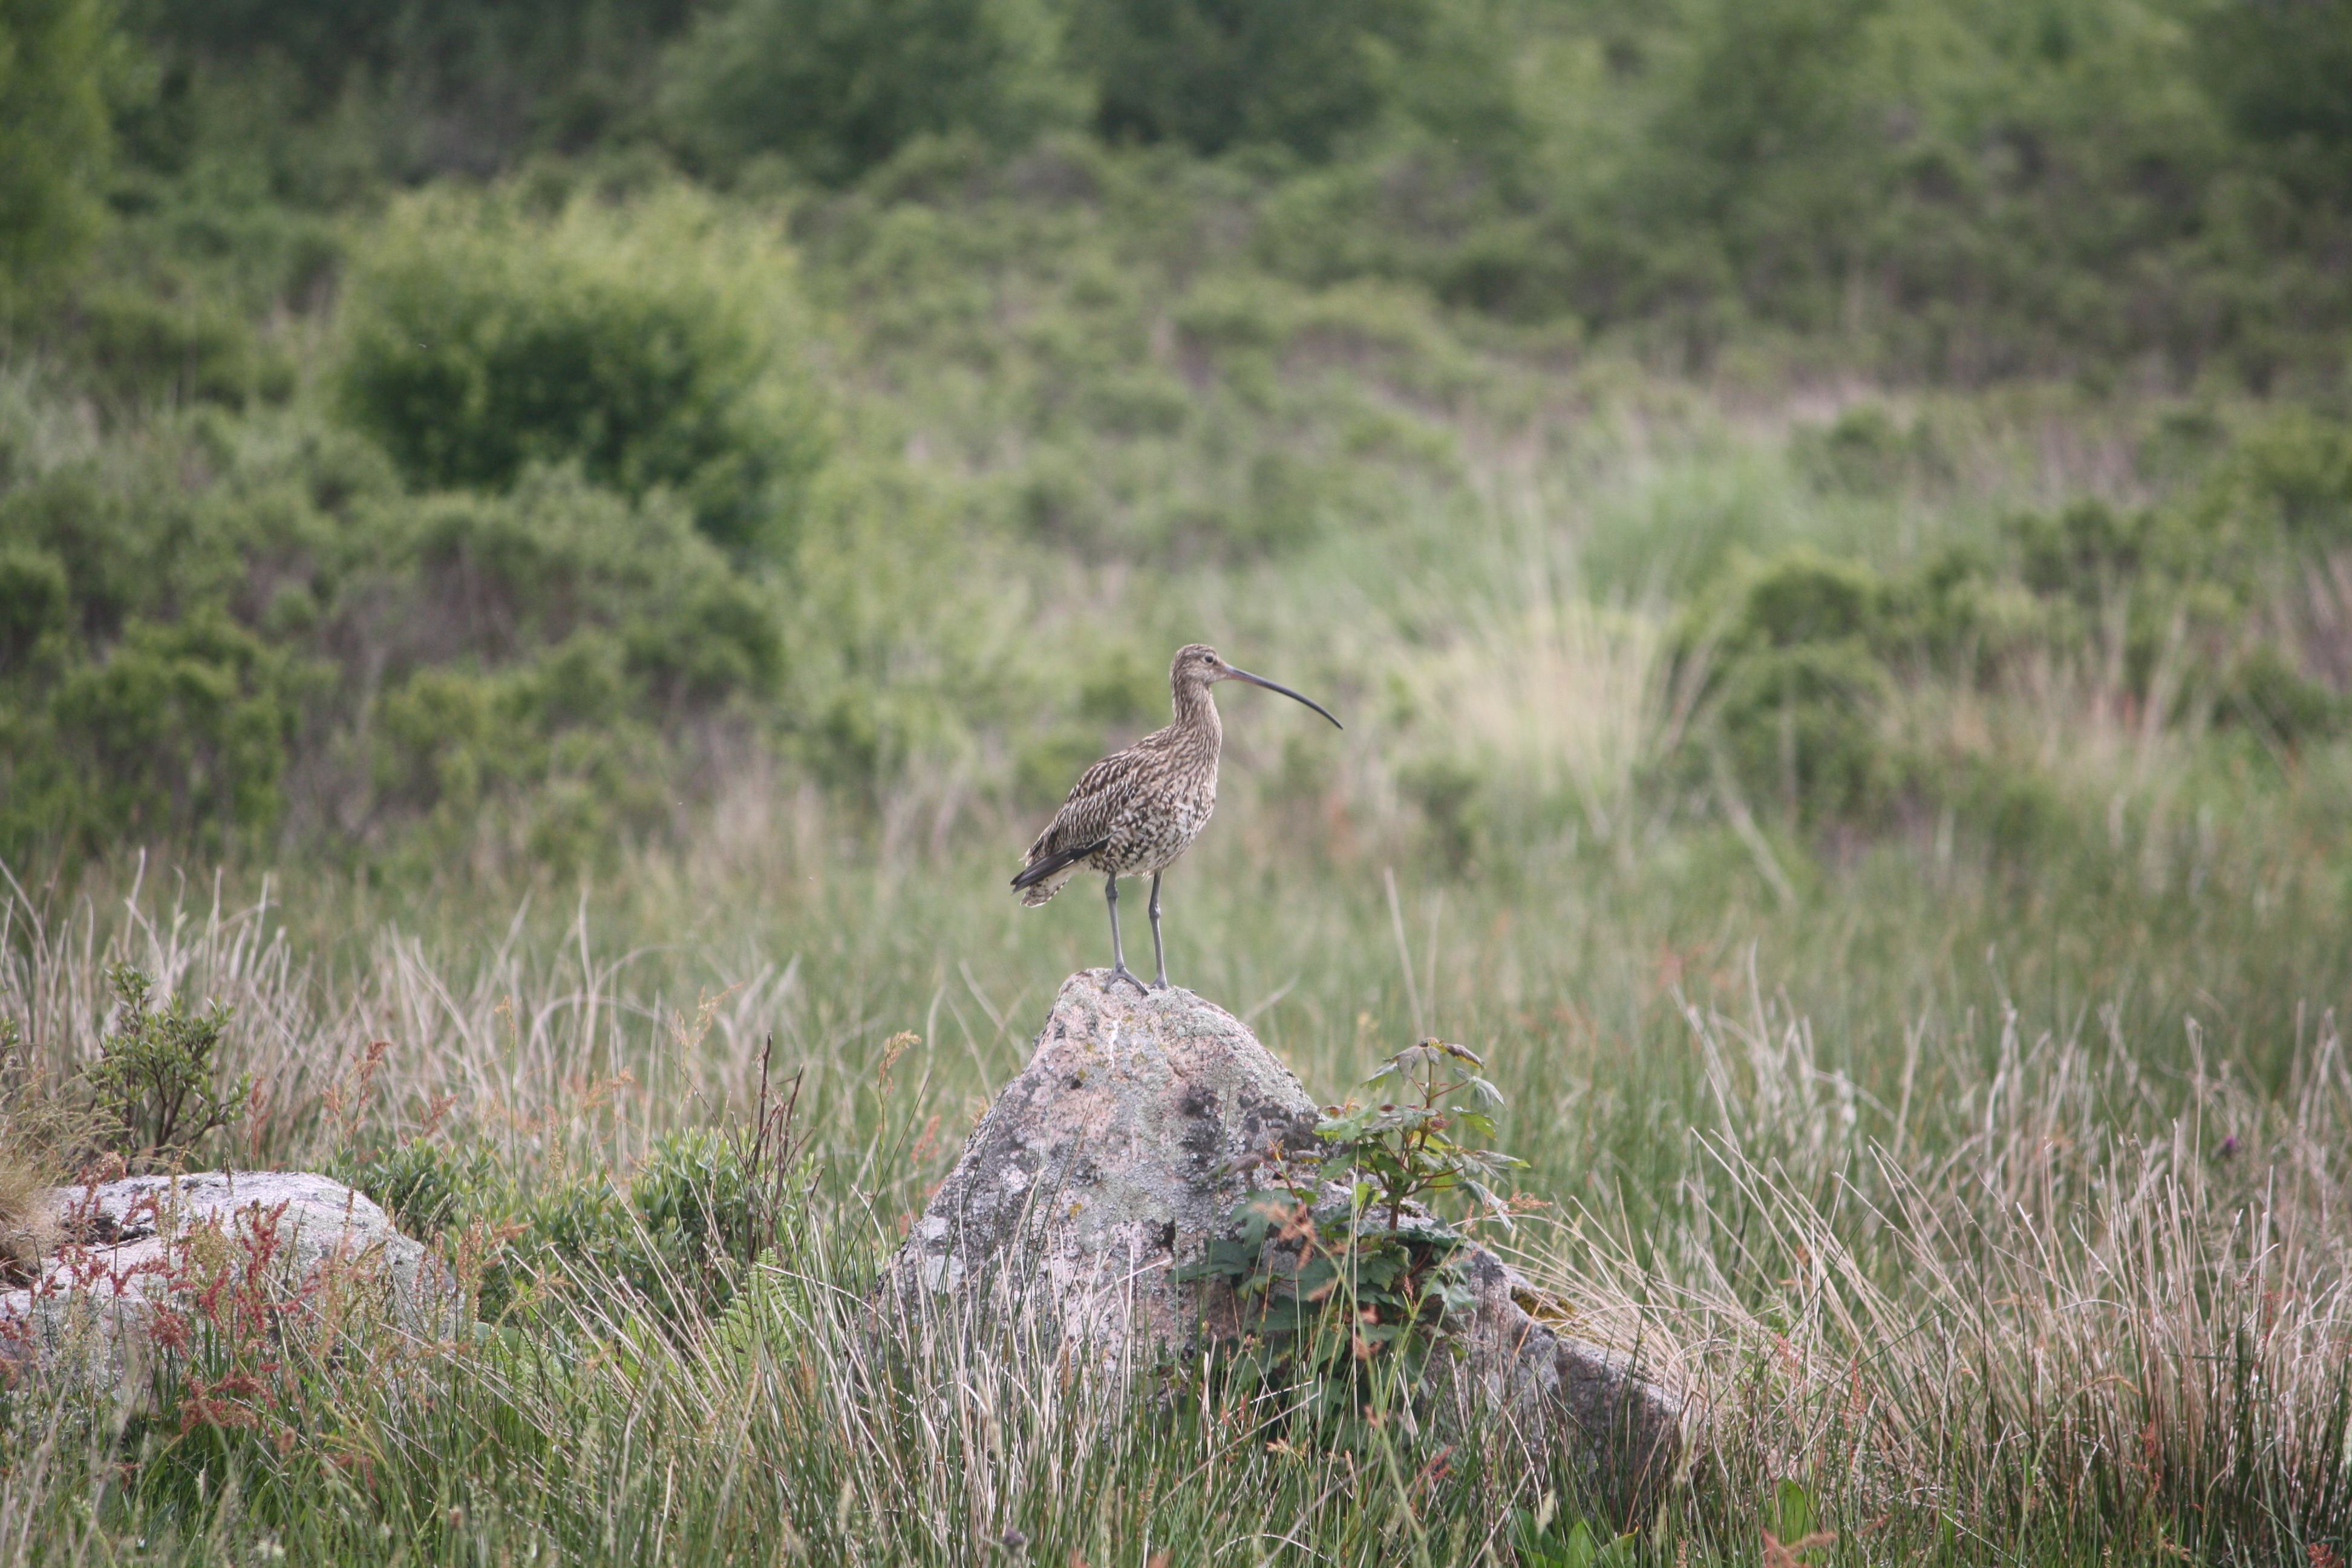 Curlew sitting on a rock in Galloway, South West Scotland